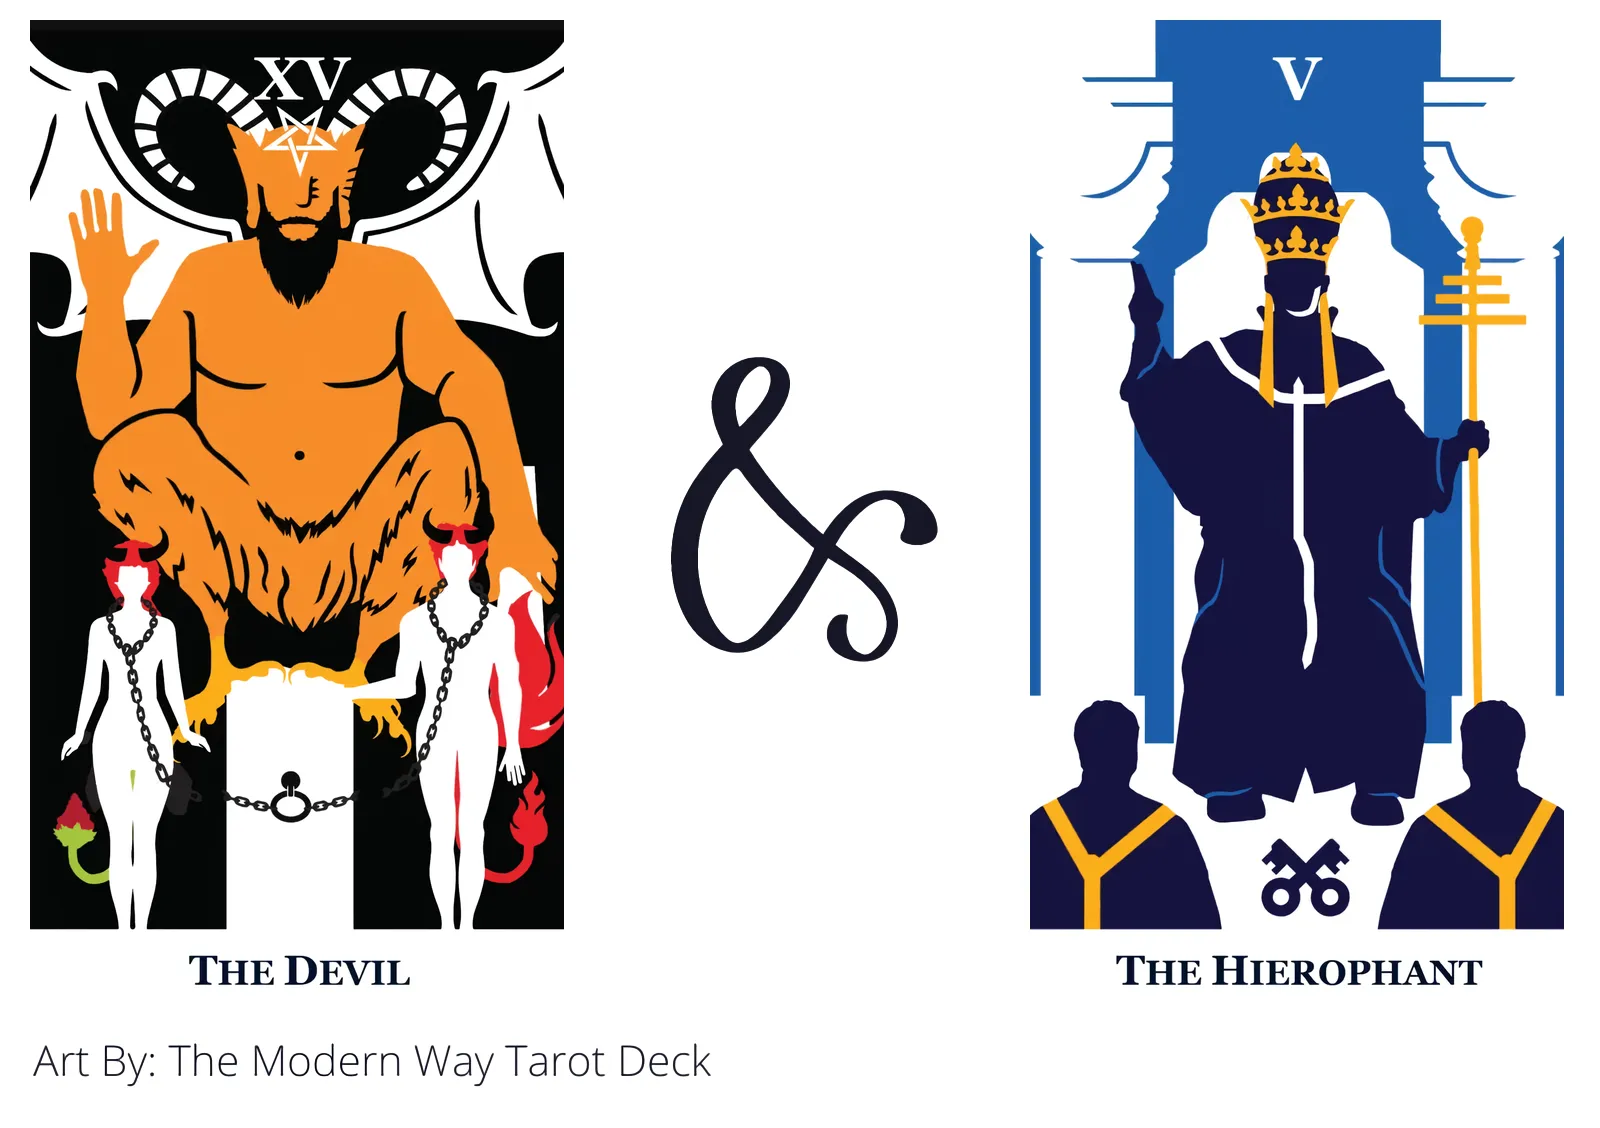 the devil and the hierophant tarot cards together